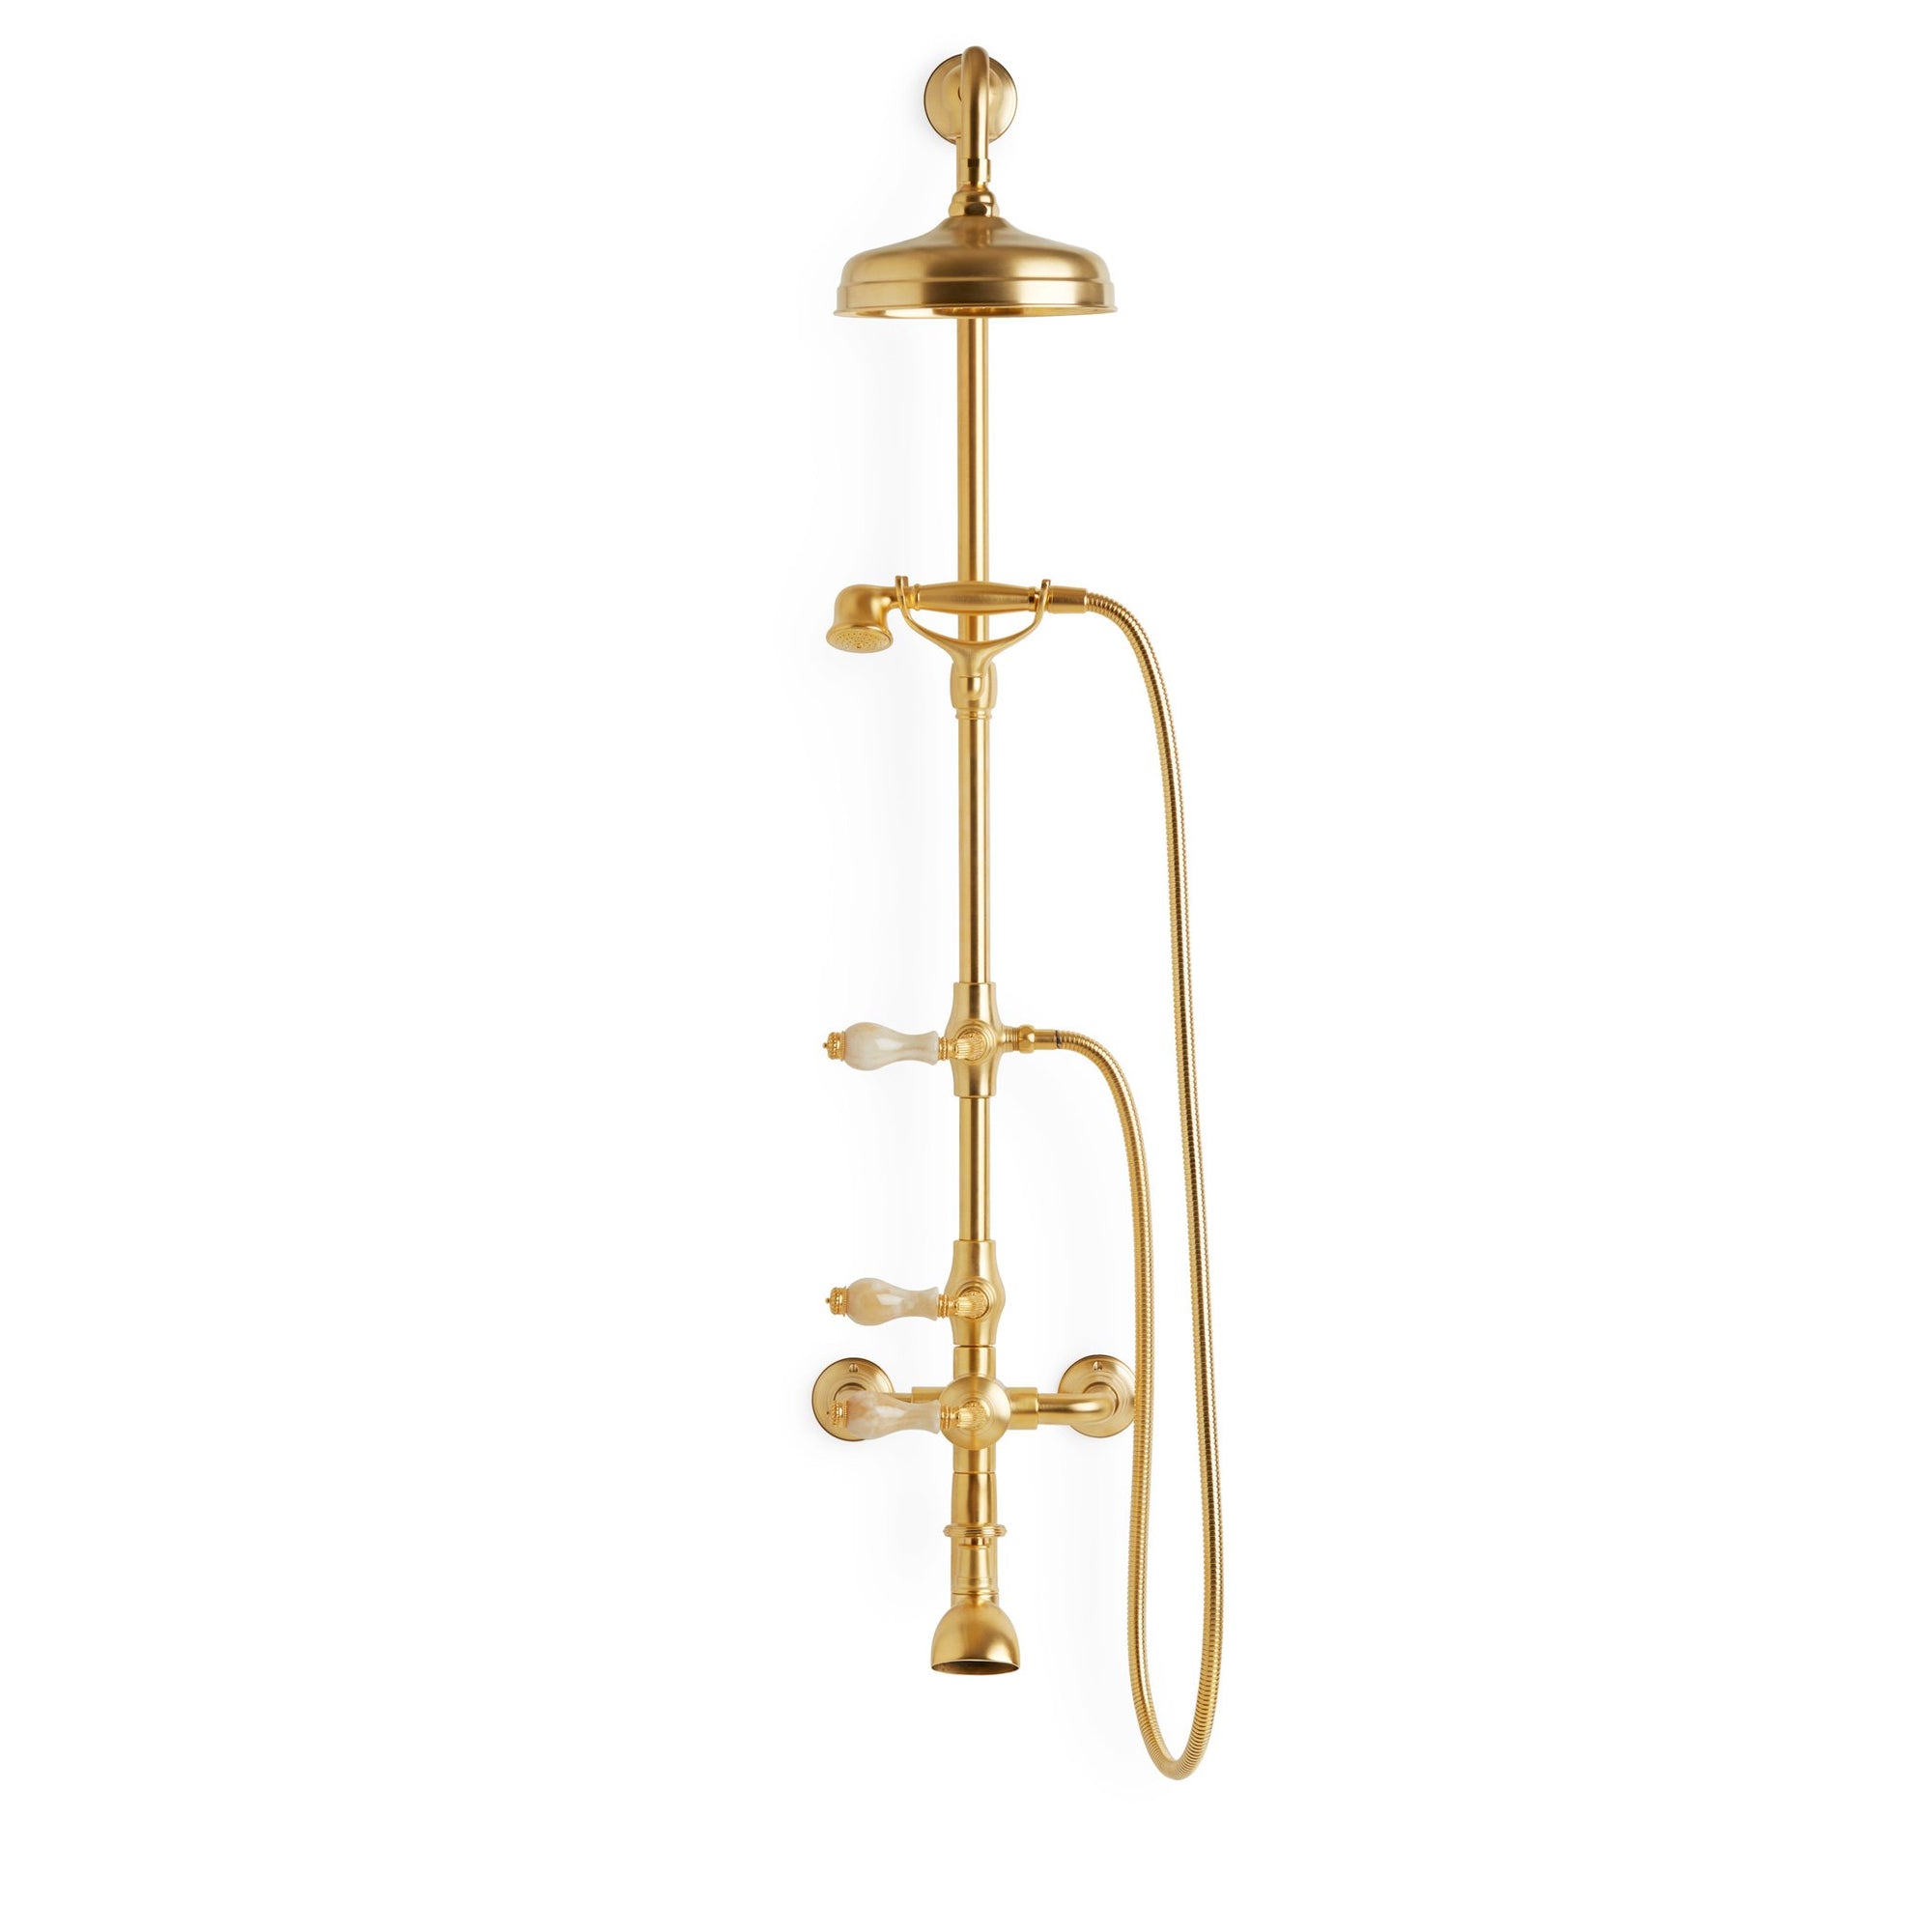 1029XSHR-HNOX-GP Sherle Wagner International Onyx Fluted Lever Exposed Shower Set in Gold Plate metal finish with Honey Onyx inserts